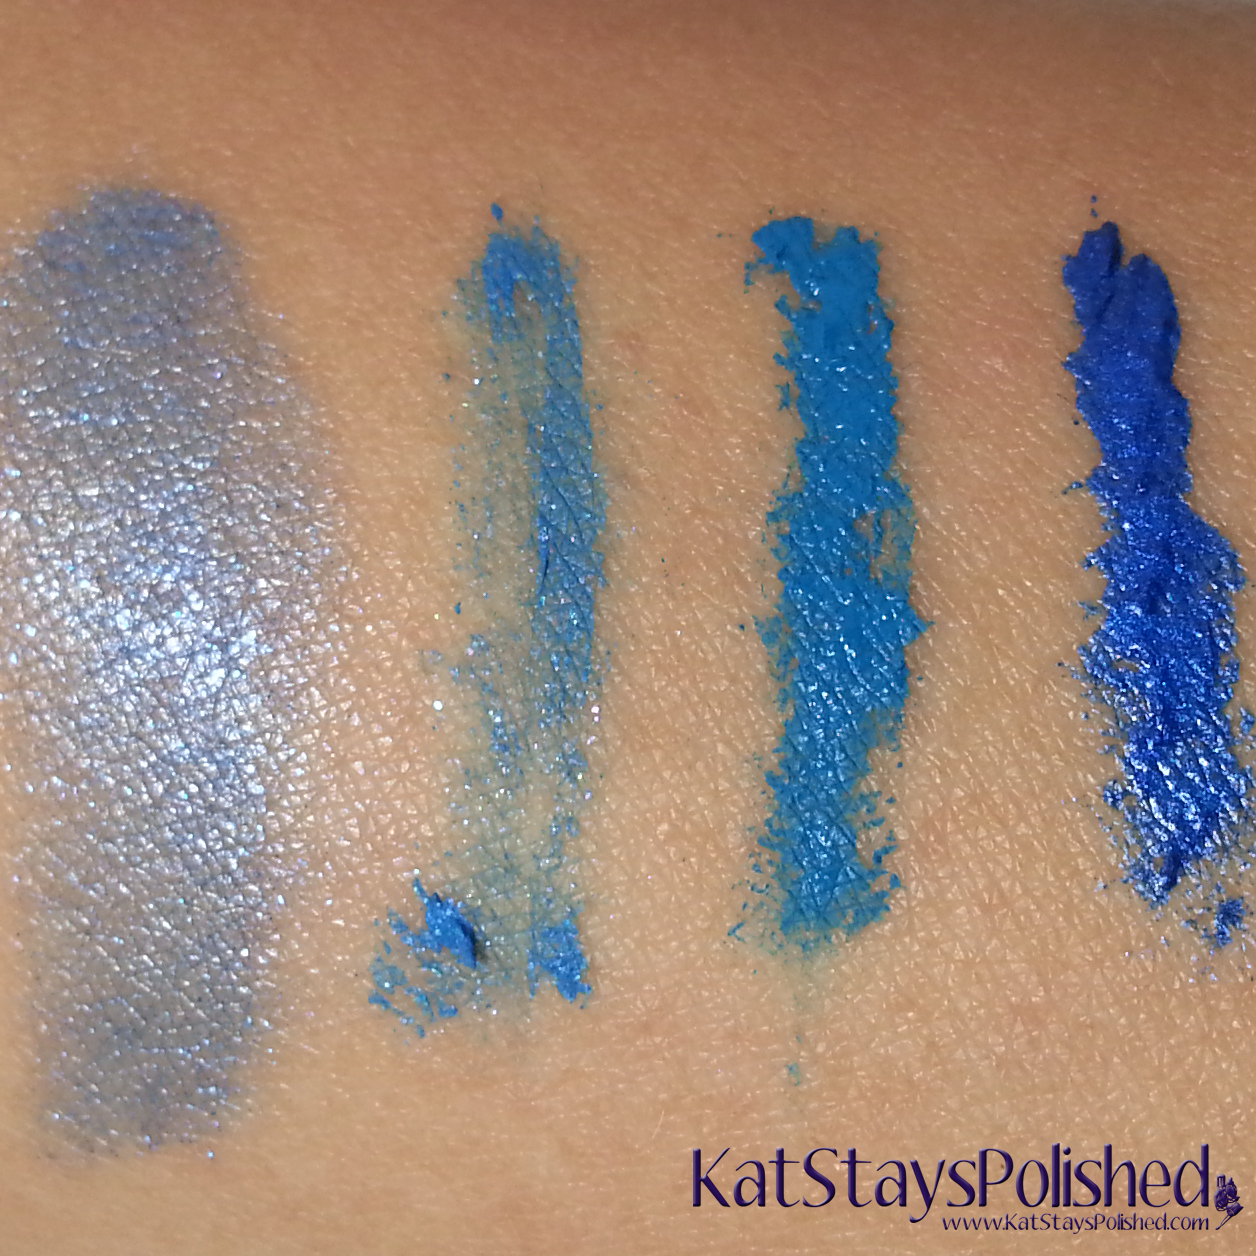 Milani Bella Blue Collection - Lipstick and Mascara Swatches | Kat Stays Polished